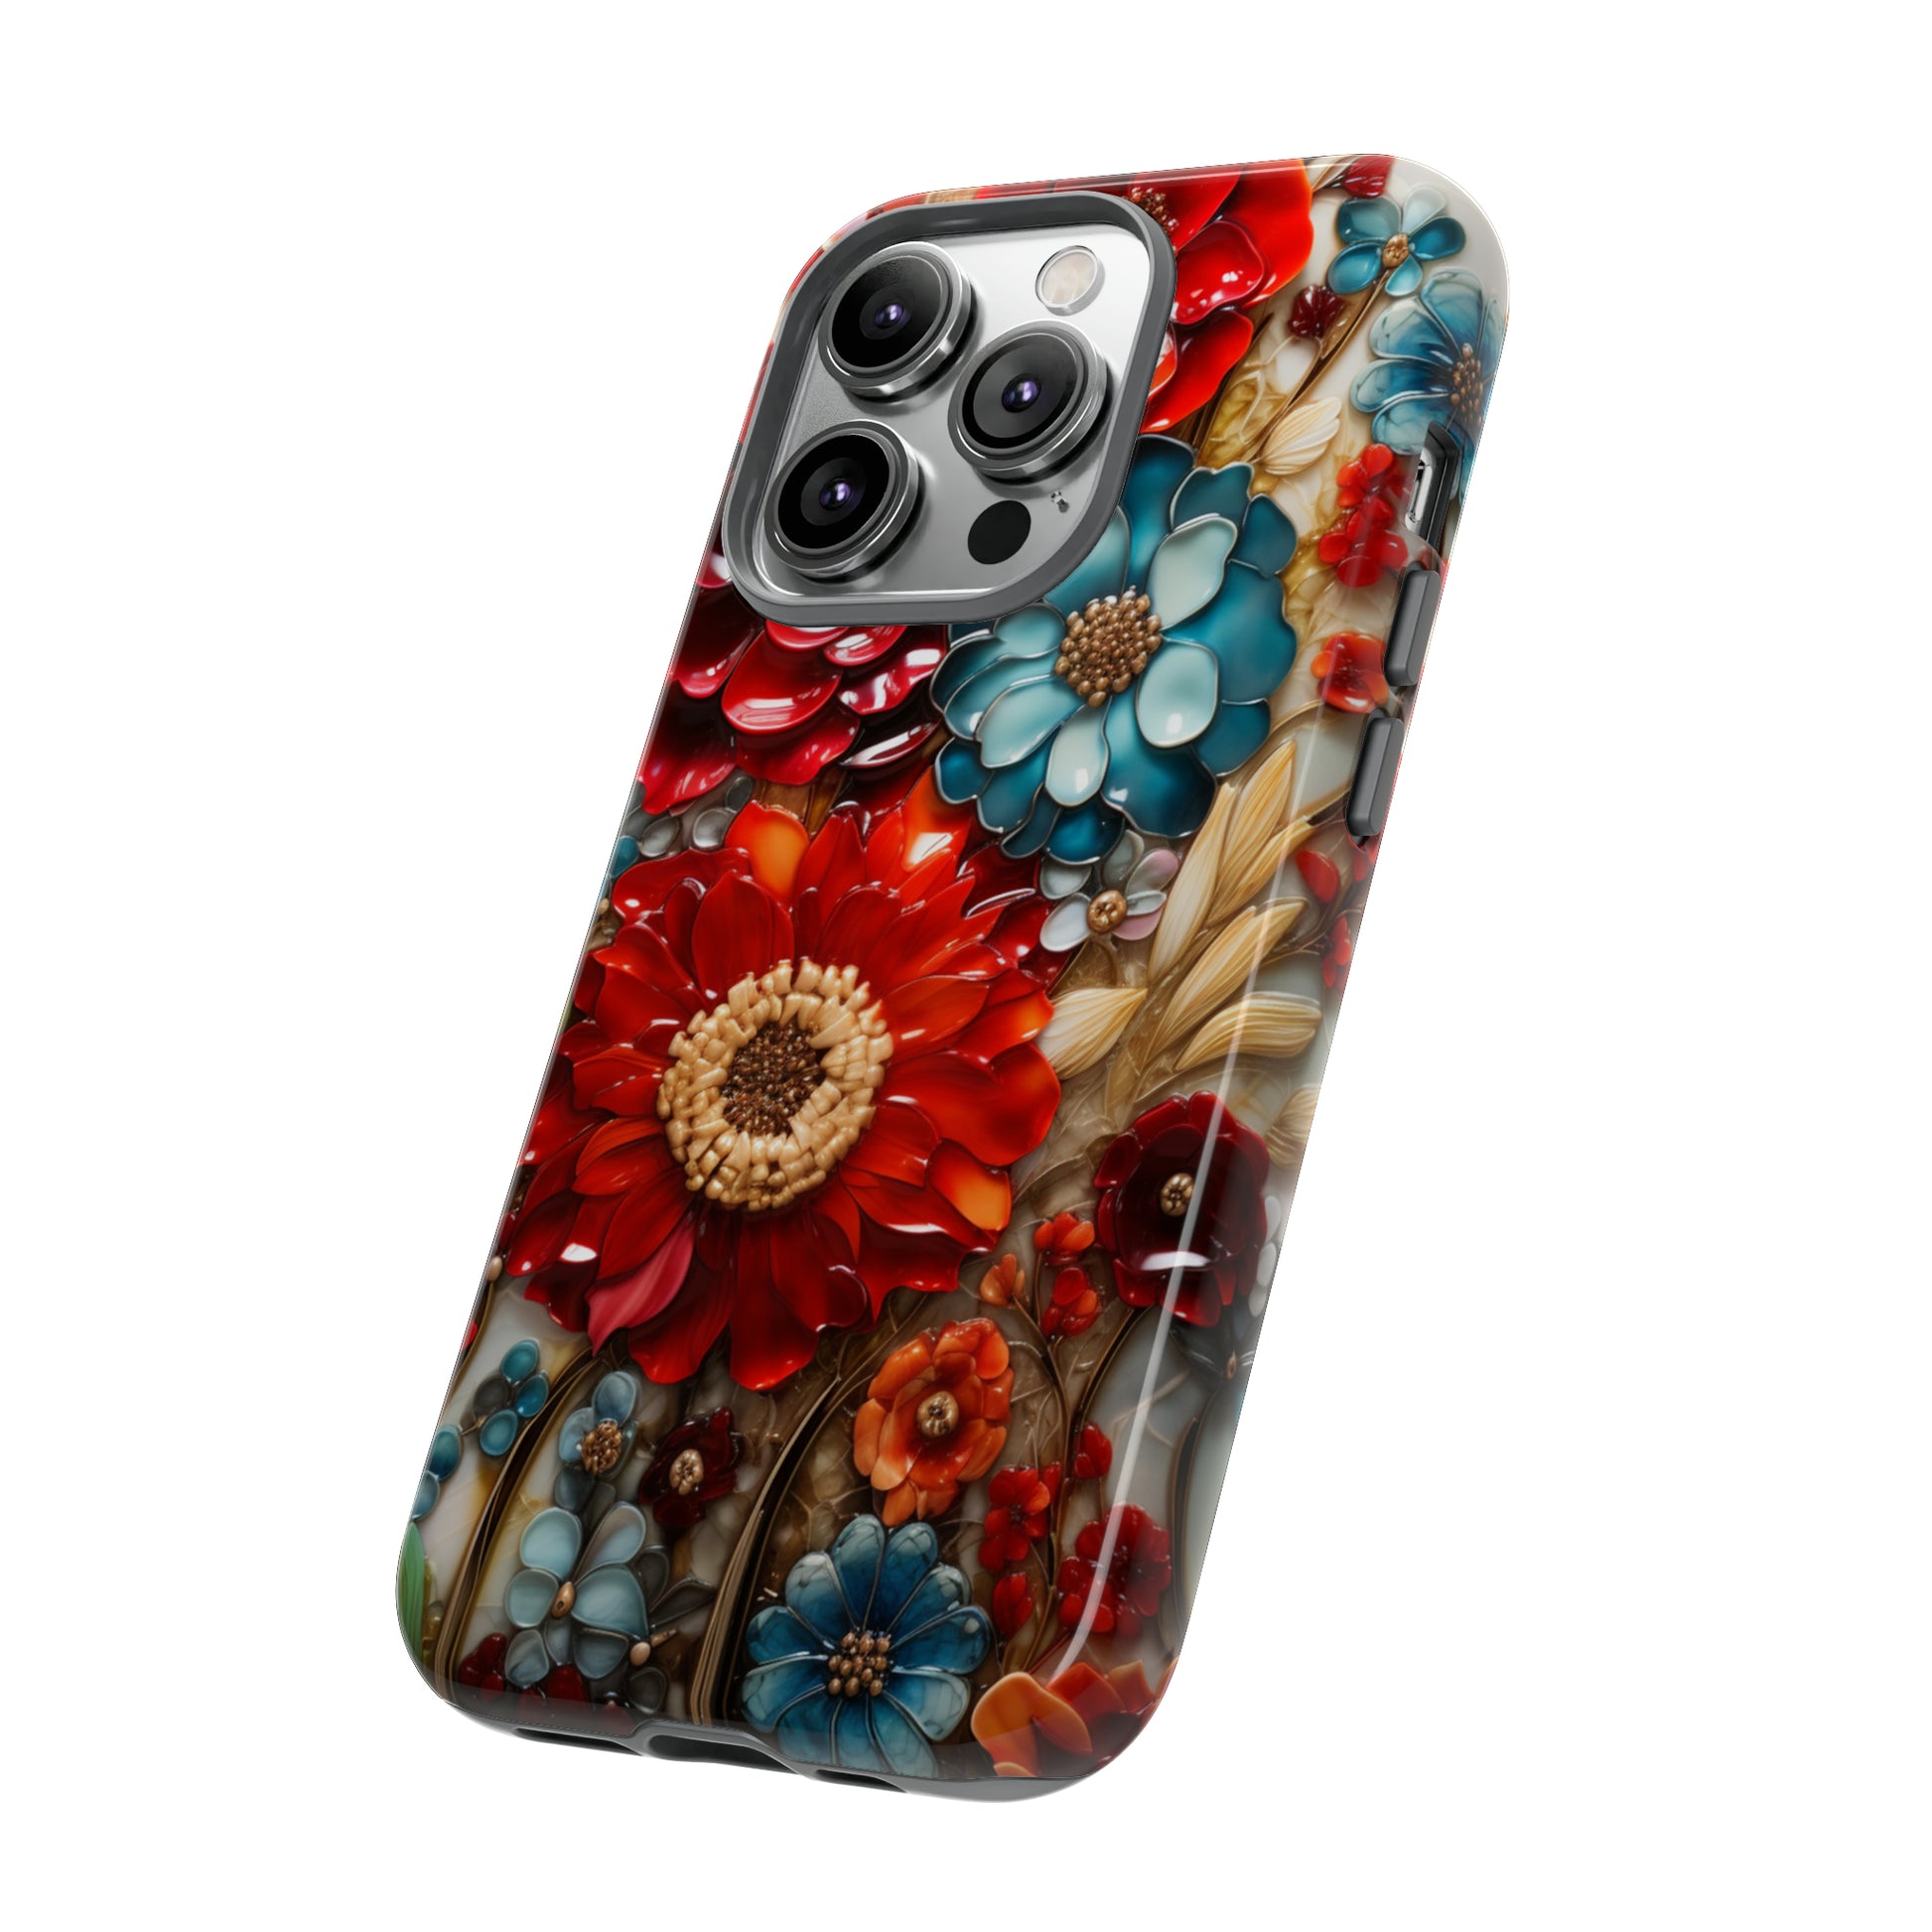 Vibrant mosaic tile phone cover for Samsung Galaxy